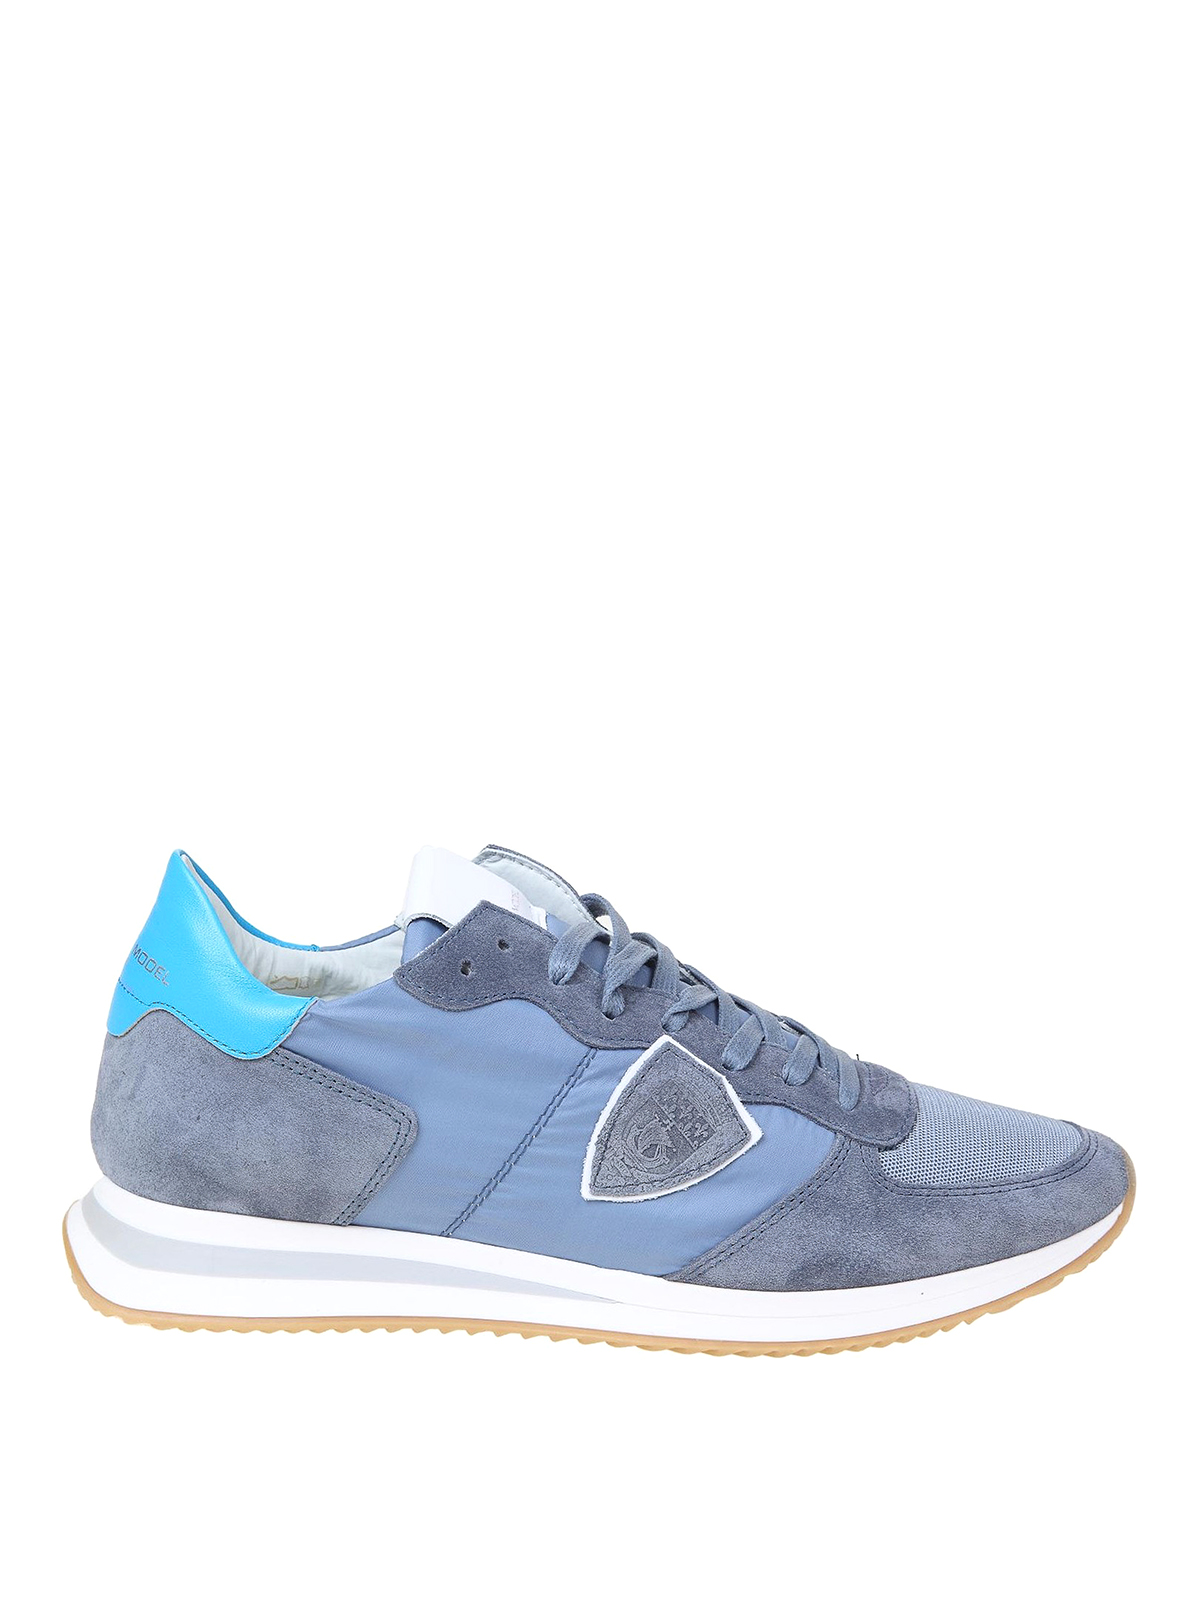 Trainers Philippe Model - Trpx sneakers - TZLUW033 | Shop online at iKRIX